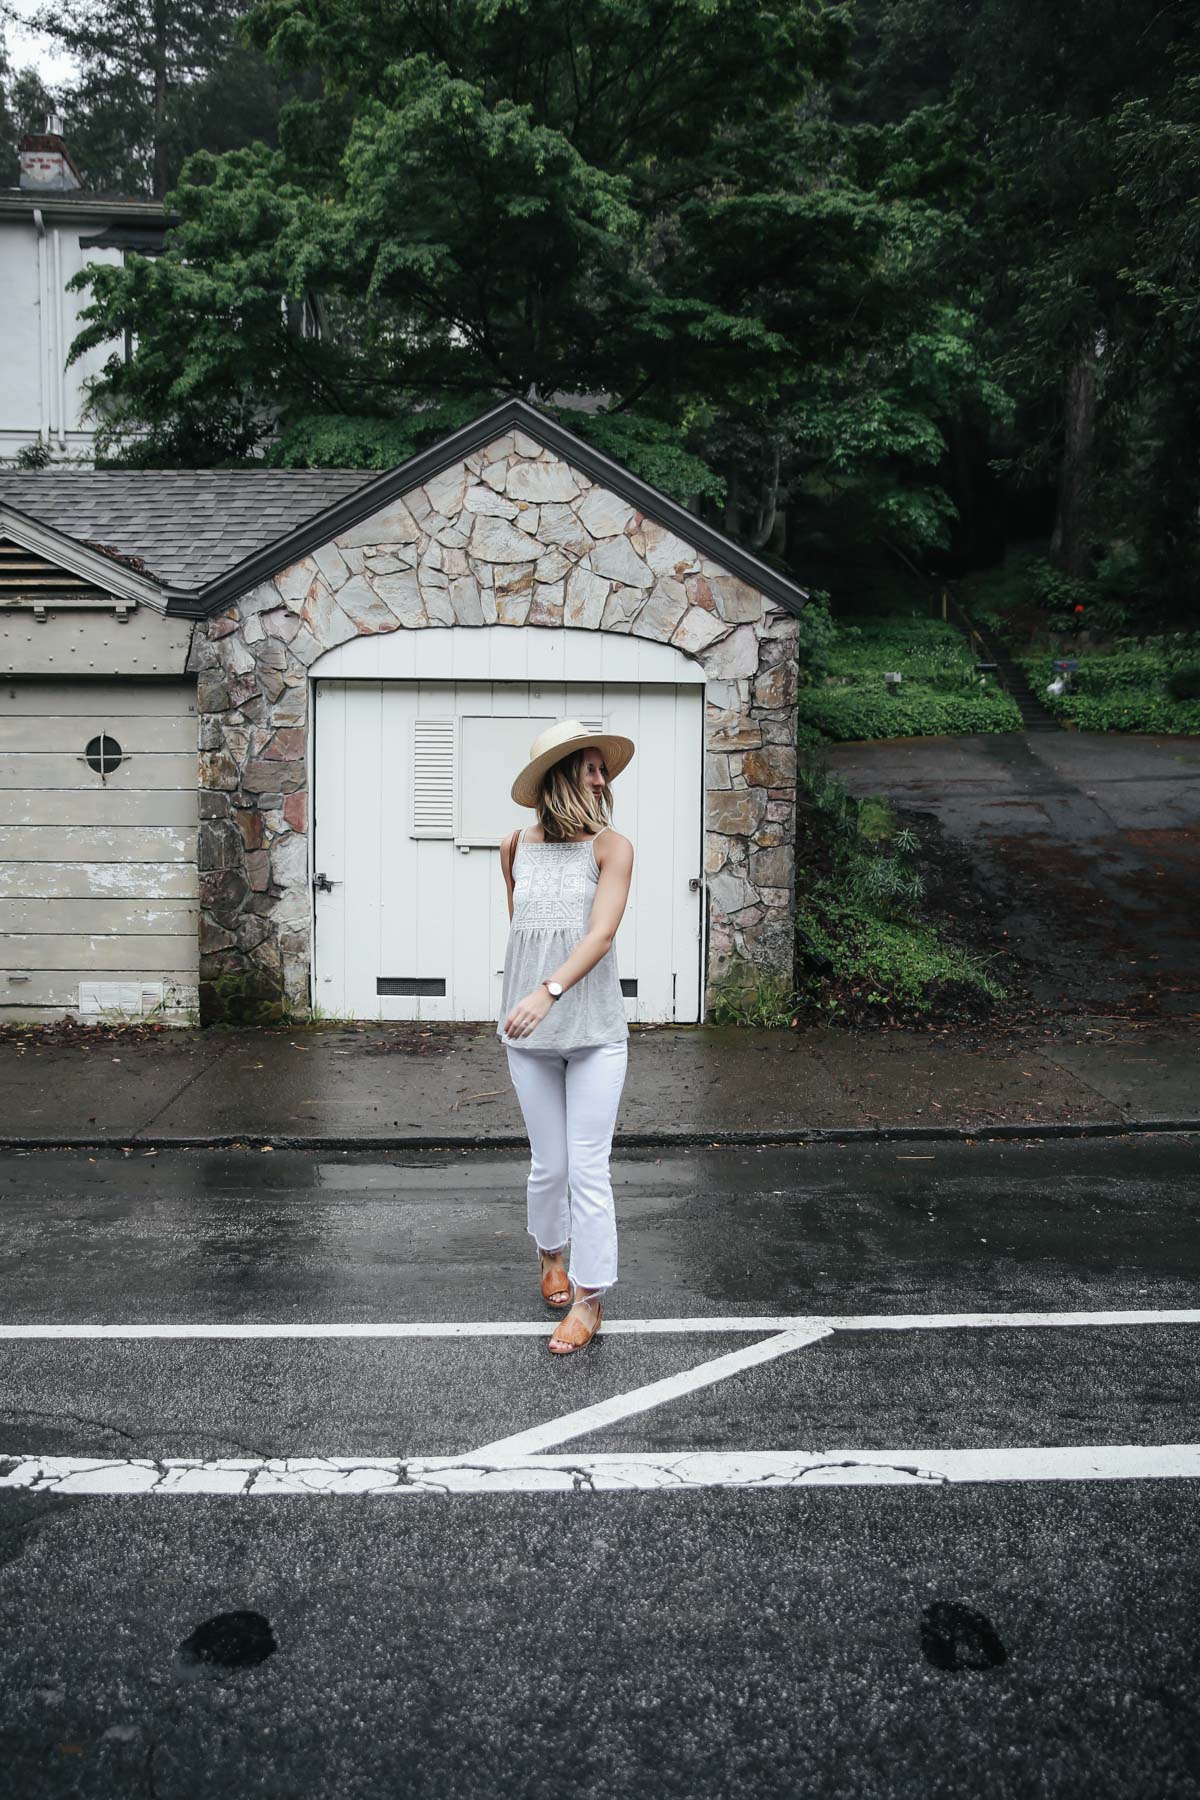 Amanda Holstein in Old Navy top and white jeans